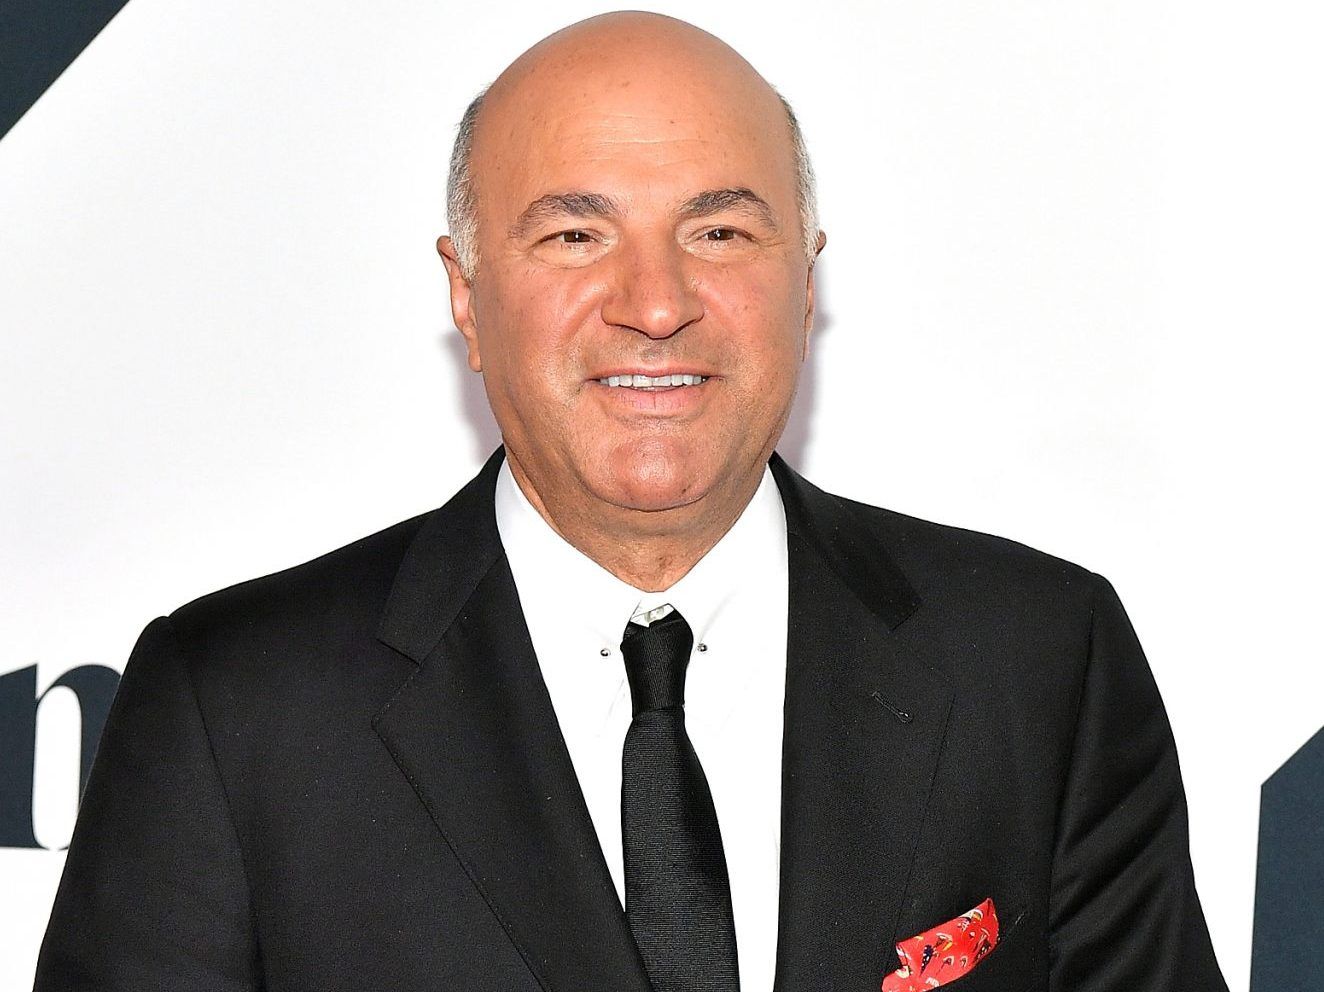 'Shark Tank' star Kevin O'Leary roasts Justin Trudeau yet again: 'TOTAL INCOMPETENCE ...THE WORST'